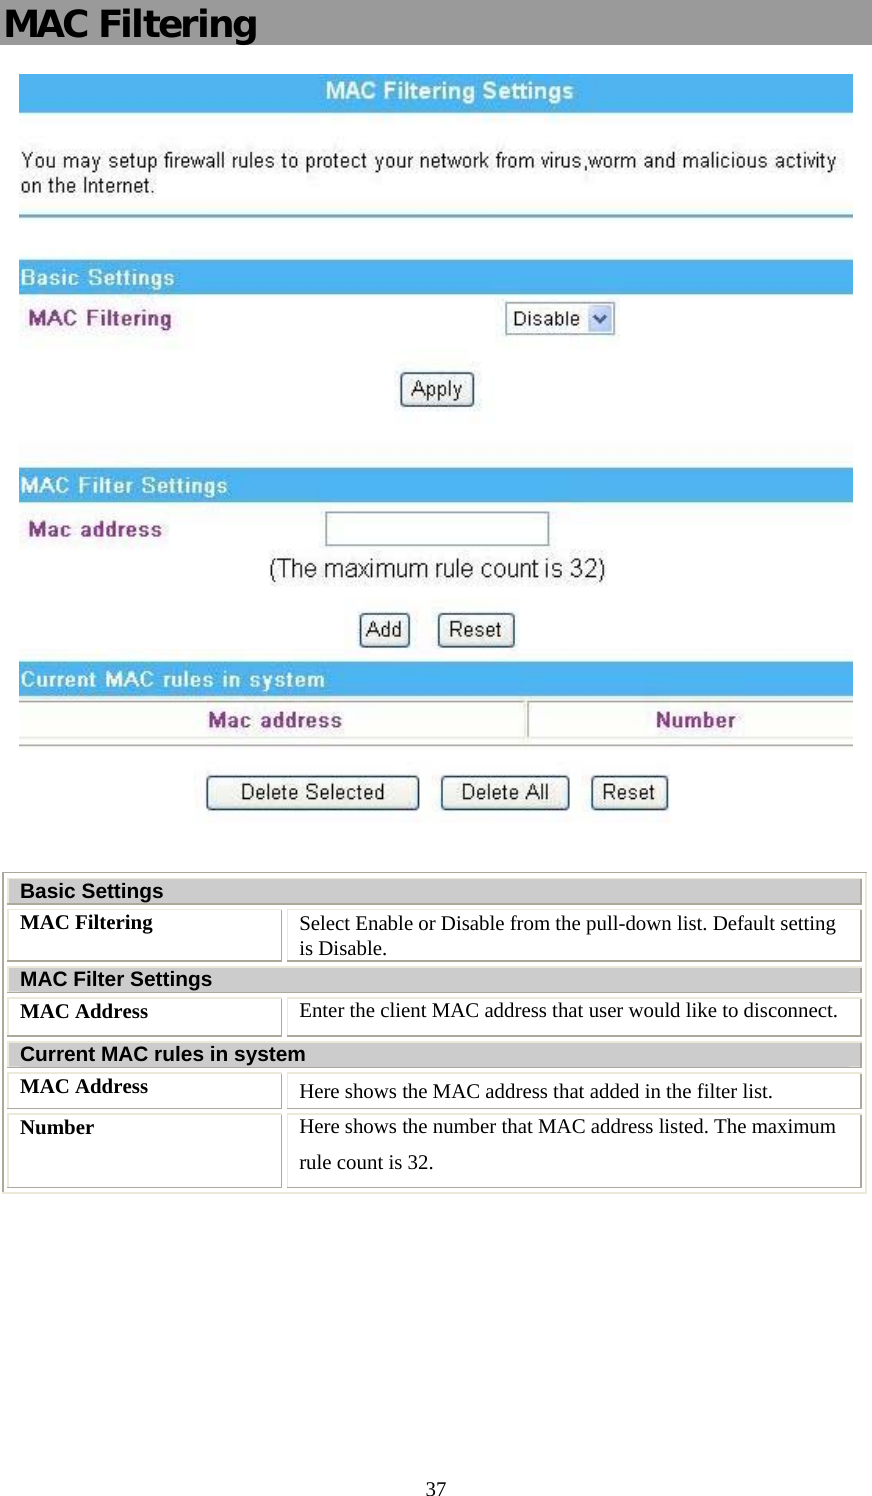   37MAC Filtering   Basic Settings MAC Filtering  Select Enable or Disable from the pull-down list. Default setting is Disable. MAC Filter Settings MAC Address  Enter the client MAC address that user would like to disconnect.  Current MAC rules in system MAC Address  Here shows the MAC address that added in the filter list. Number  Here shows the number that MAC address listed. The maximum rule count is 32.   